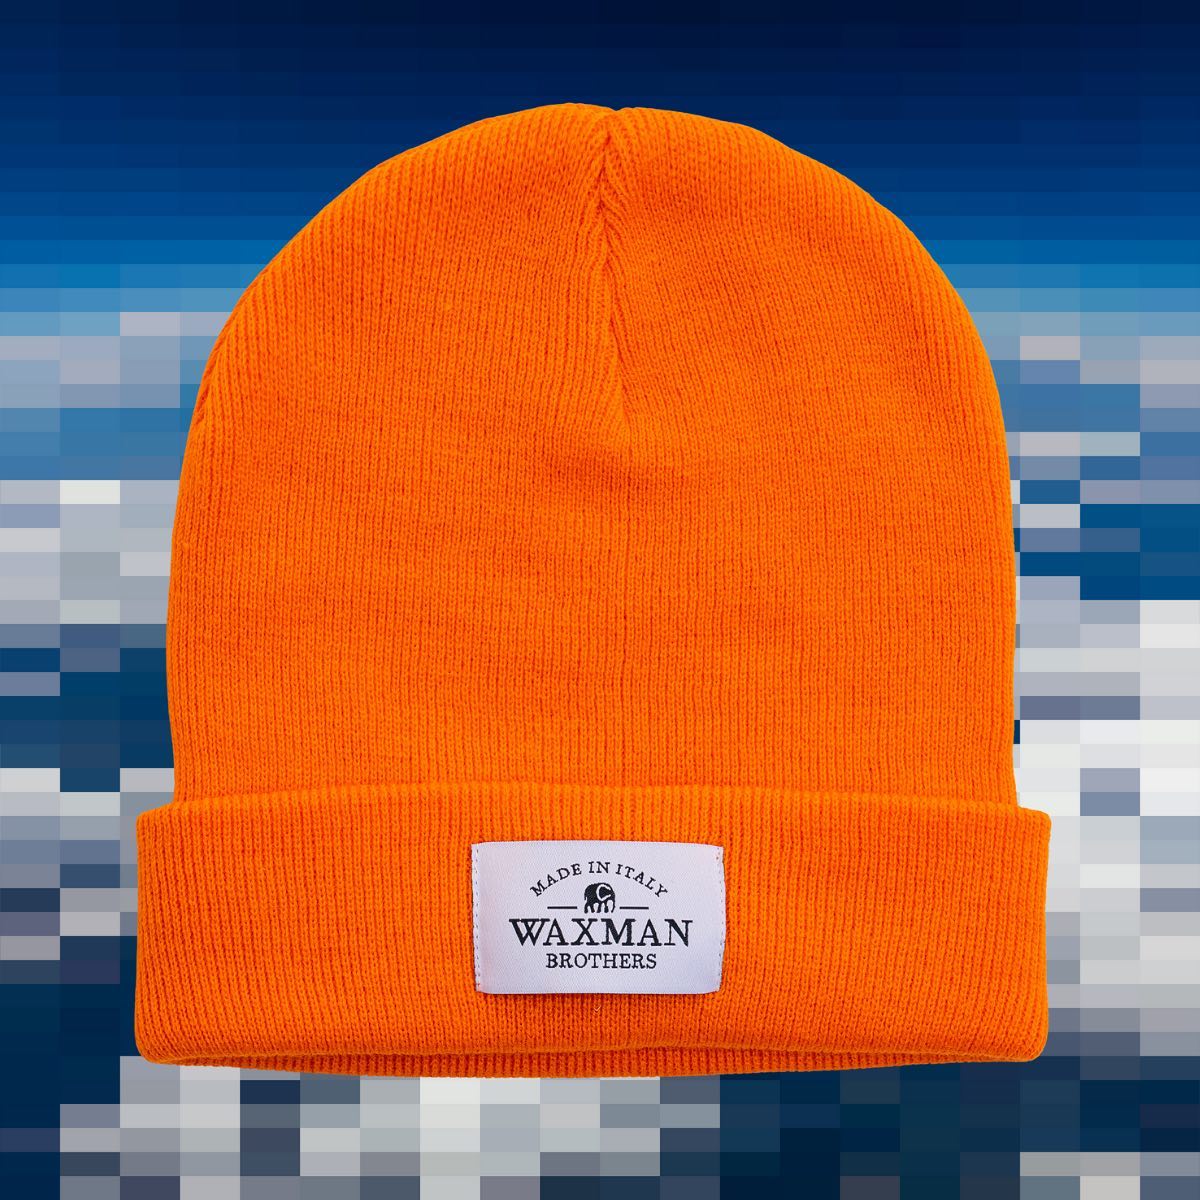 Waxman Brothers - Beanie Made in Italy Orange